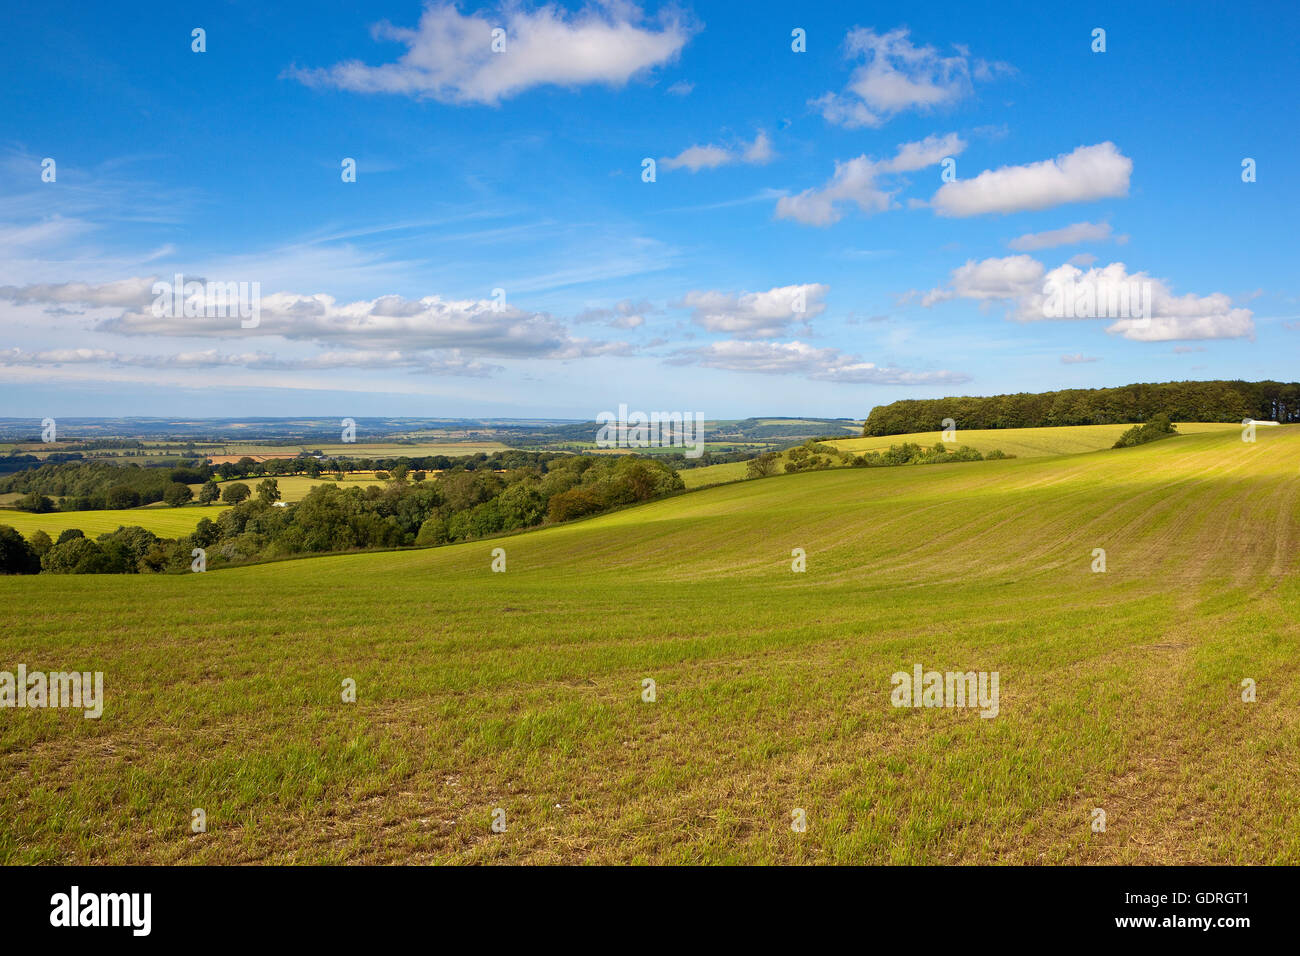 A hillside hay field with views over the scenic Yorkshire wolds under a blue cloudy sky in summertime. Stock Photo